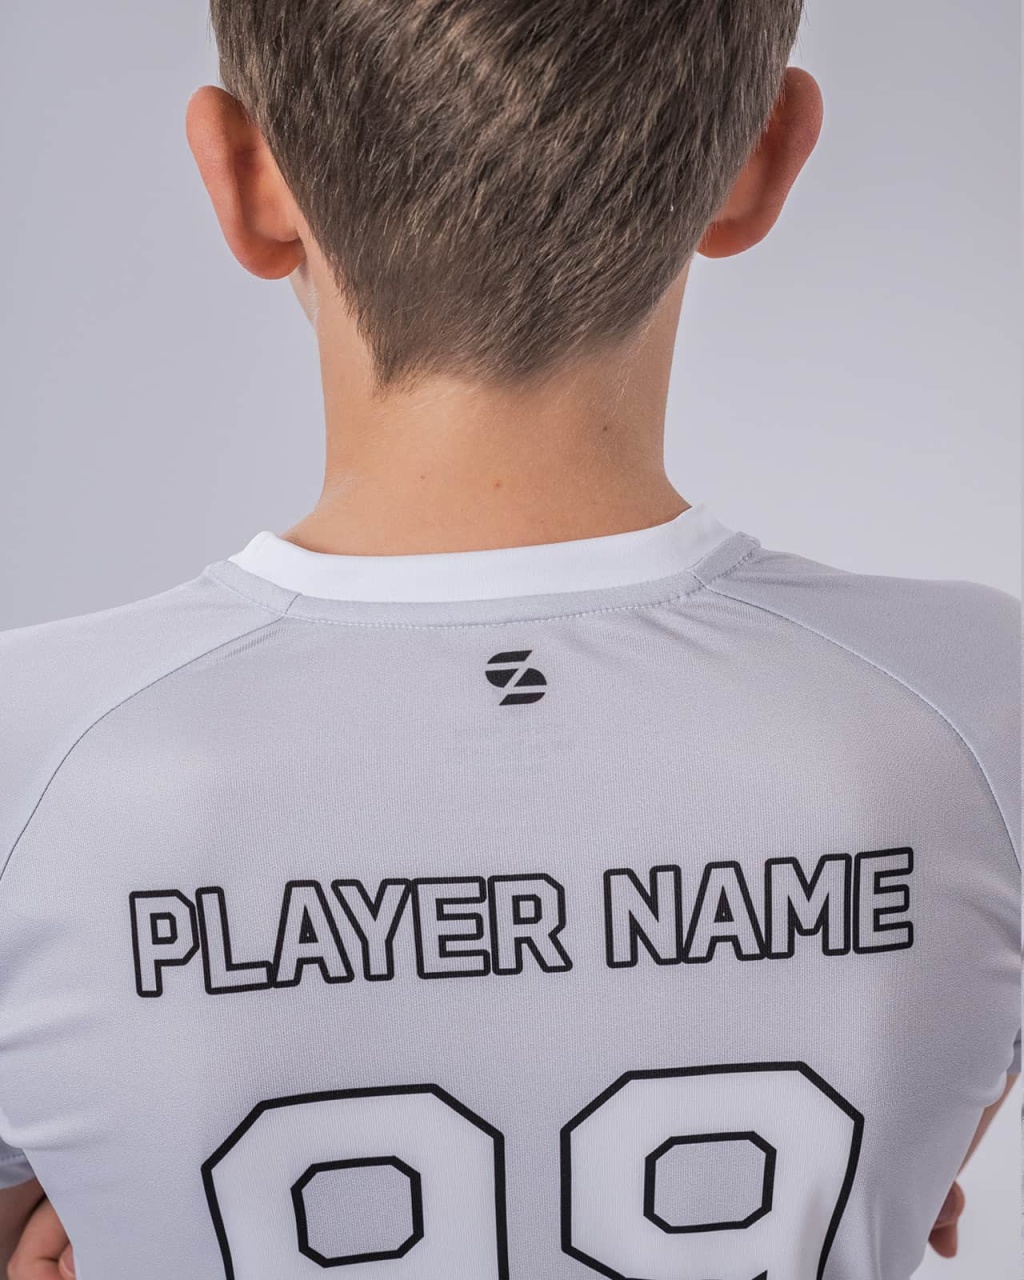 Ace boy’s volleyball jersey